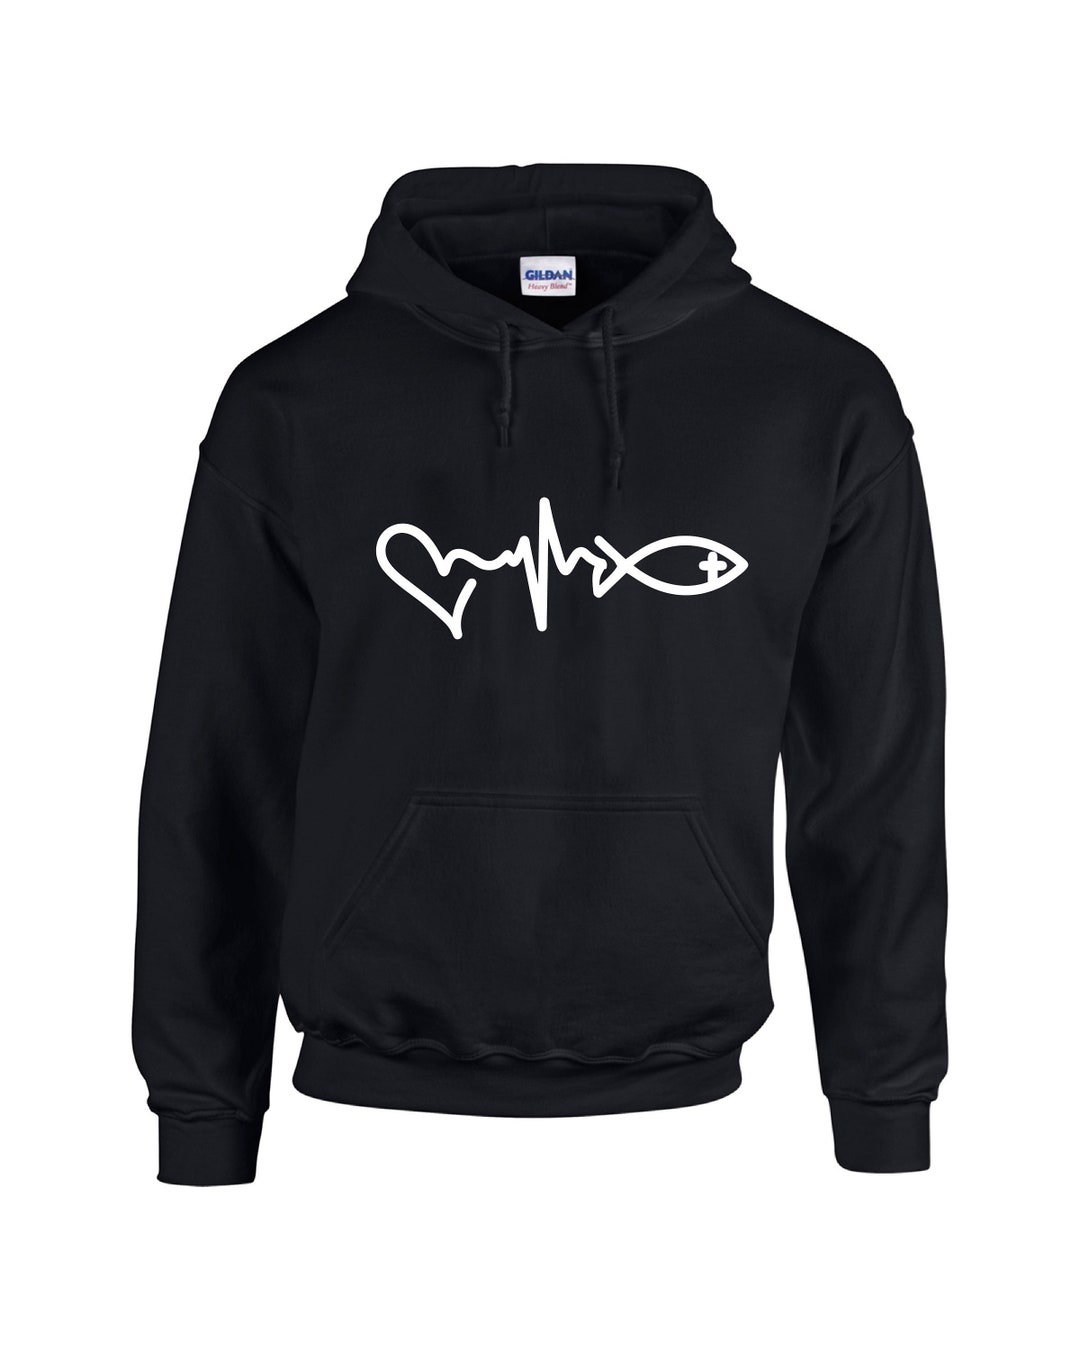 FISHING HOODIE, HEARTBEAT Hoodie, Stay Warm With the Fish Heartbeat Line  Hoodie Perfect for Outdoor Activities 